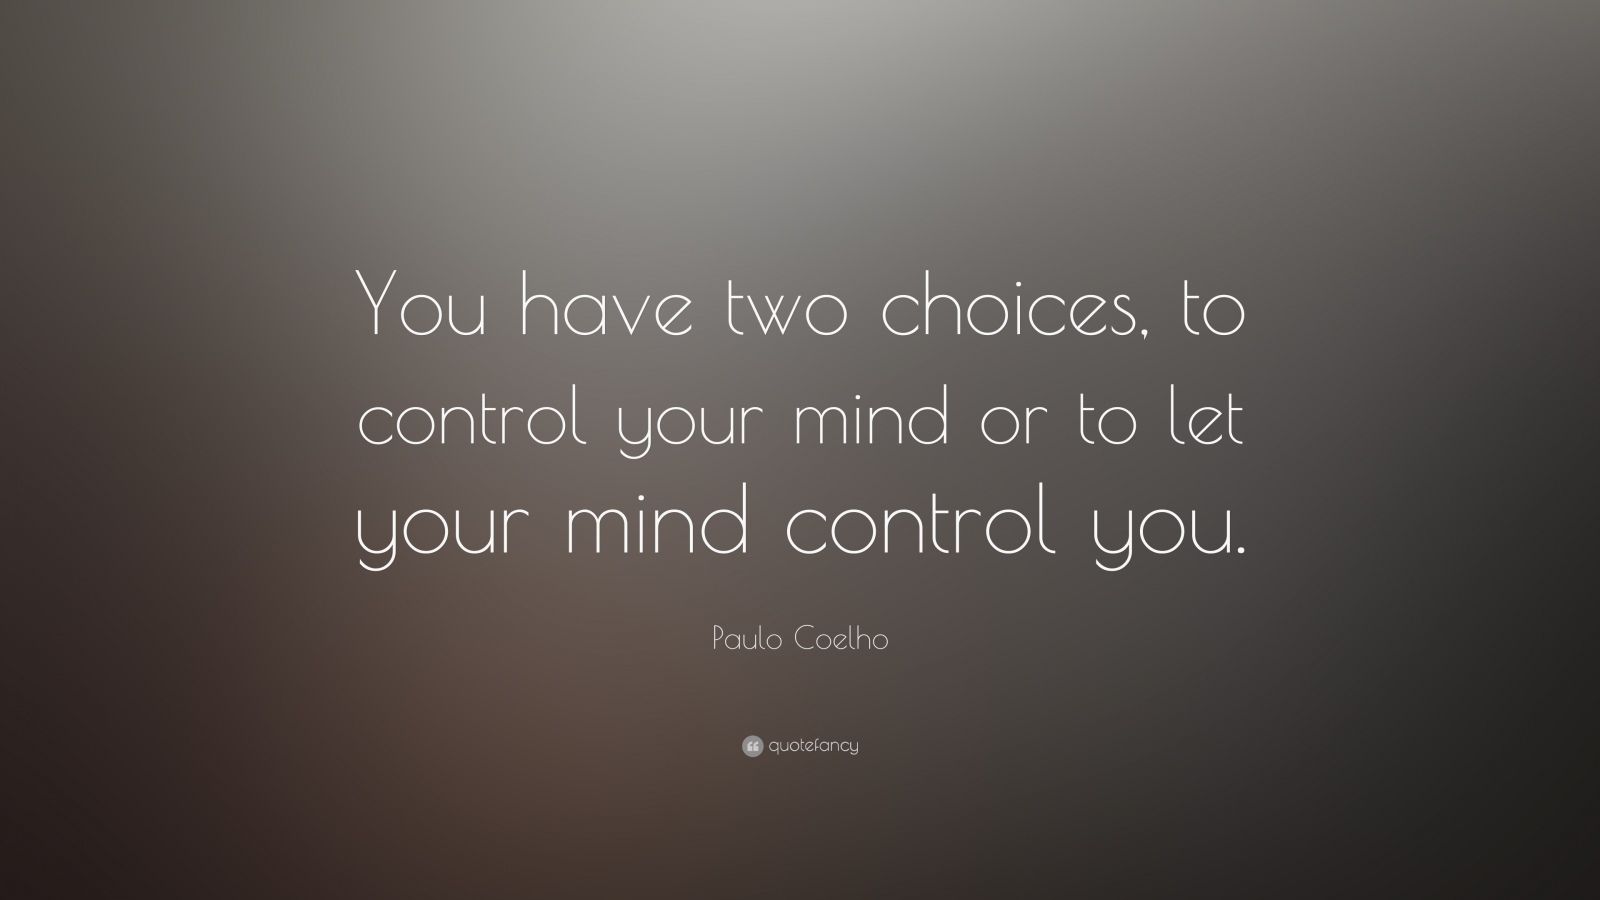 Paulo Coelho Quote: “You have two choices, to control your mind or to let your mind control you.”